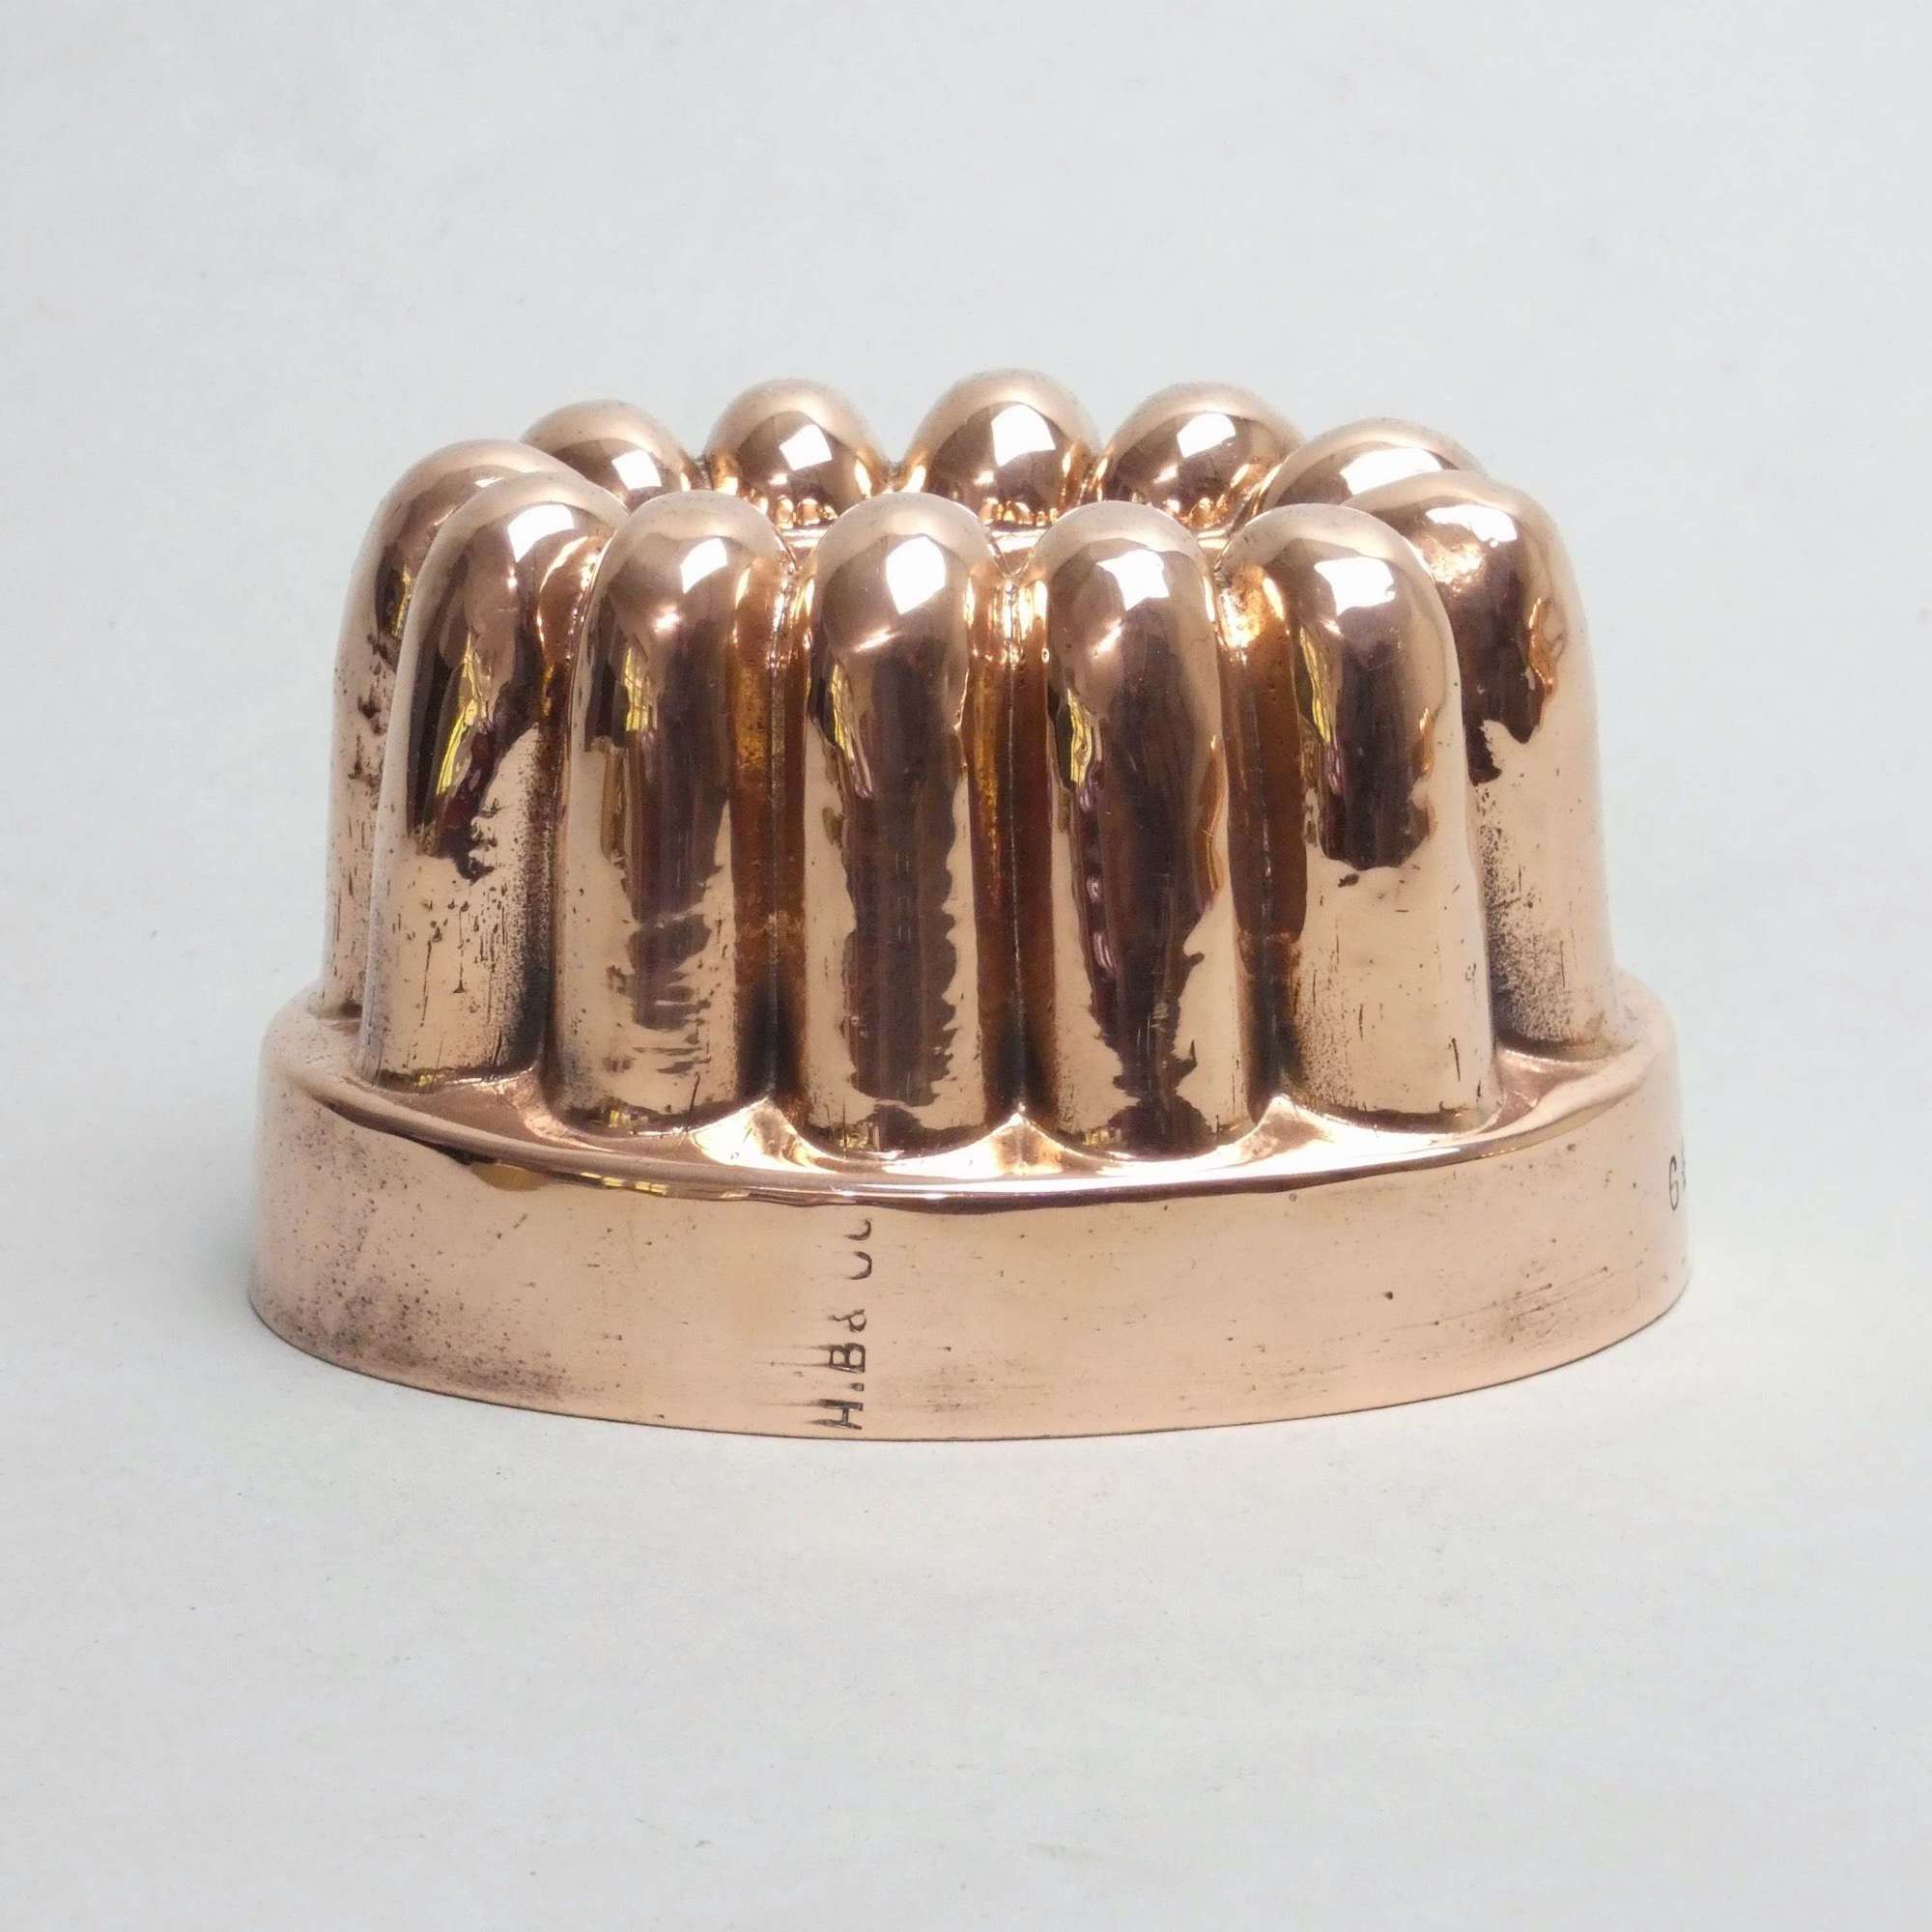 Small, fluted copper jelly mould